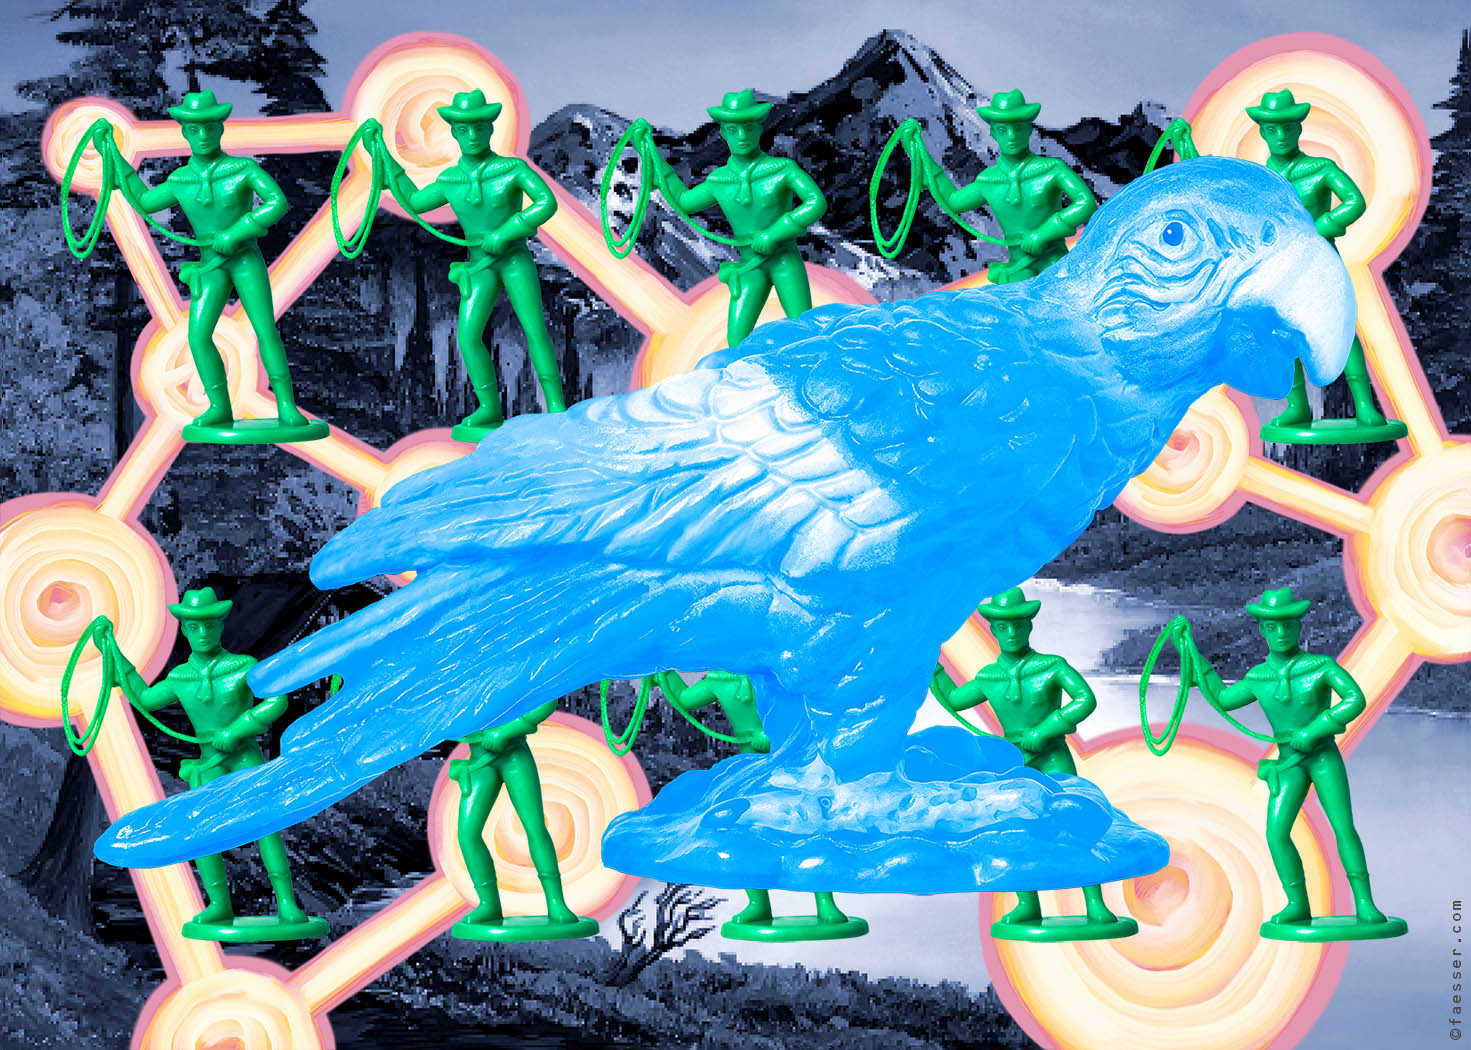 Ten cowboys try to capture a parrot with their lassos; artist Roland Faesser, sculptor and painter 2021